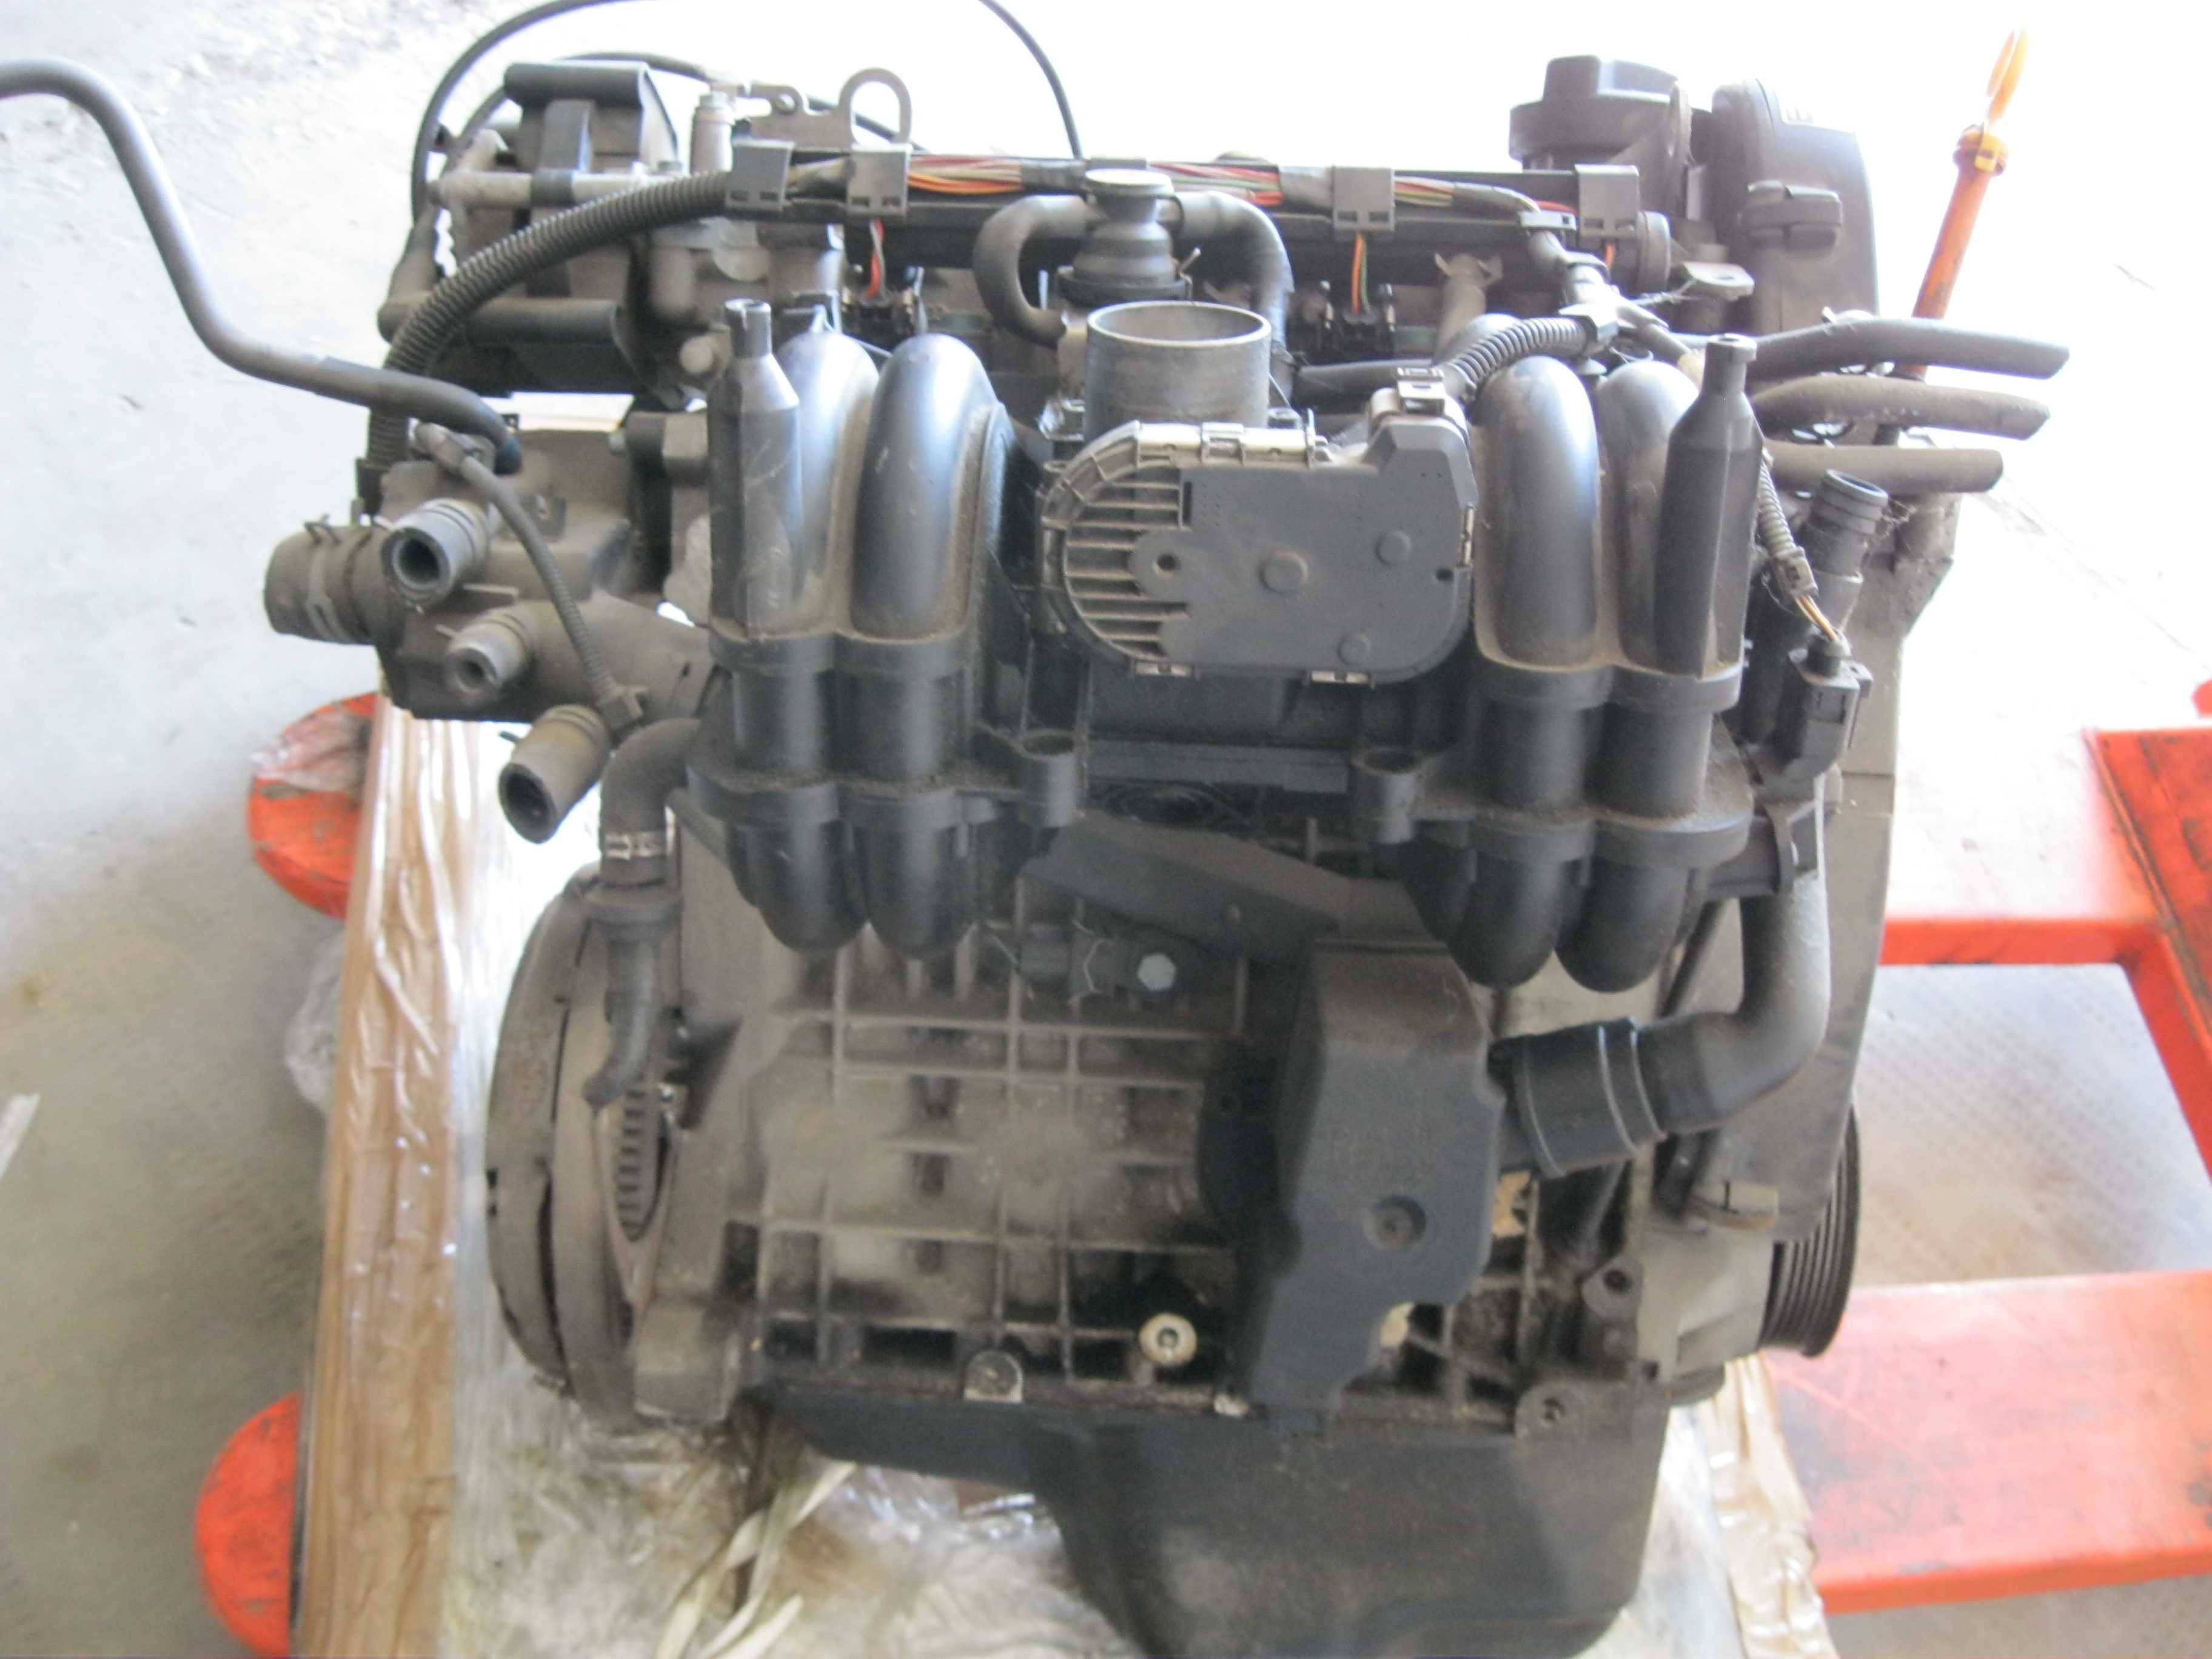 Motor 1,4i*AUD*VwPOLO,LUPO44Kw/60CpEuro4*CuAnexe&Catalizator*80000kmFr